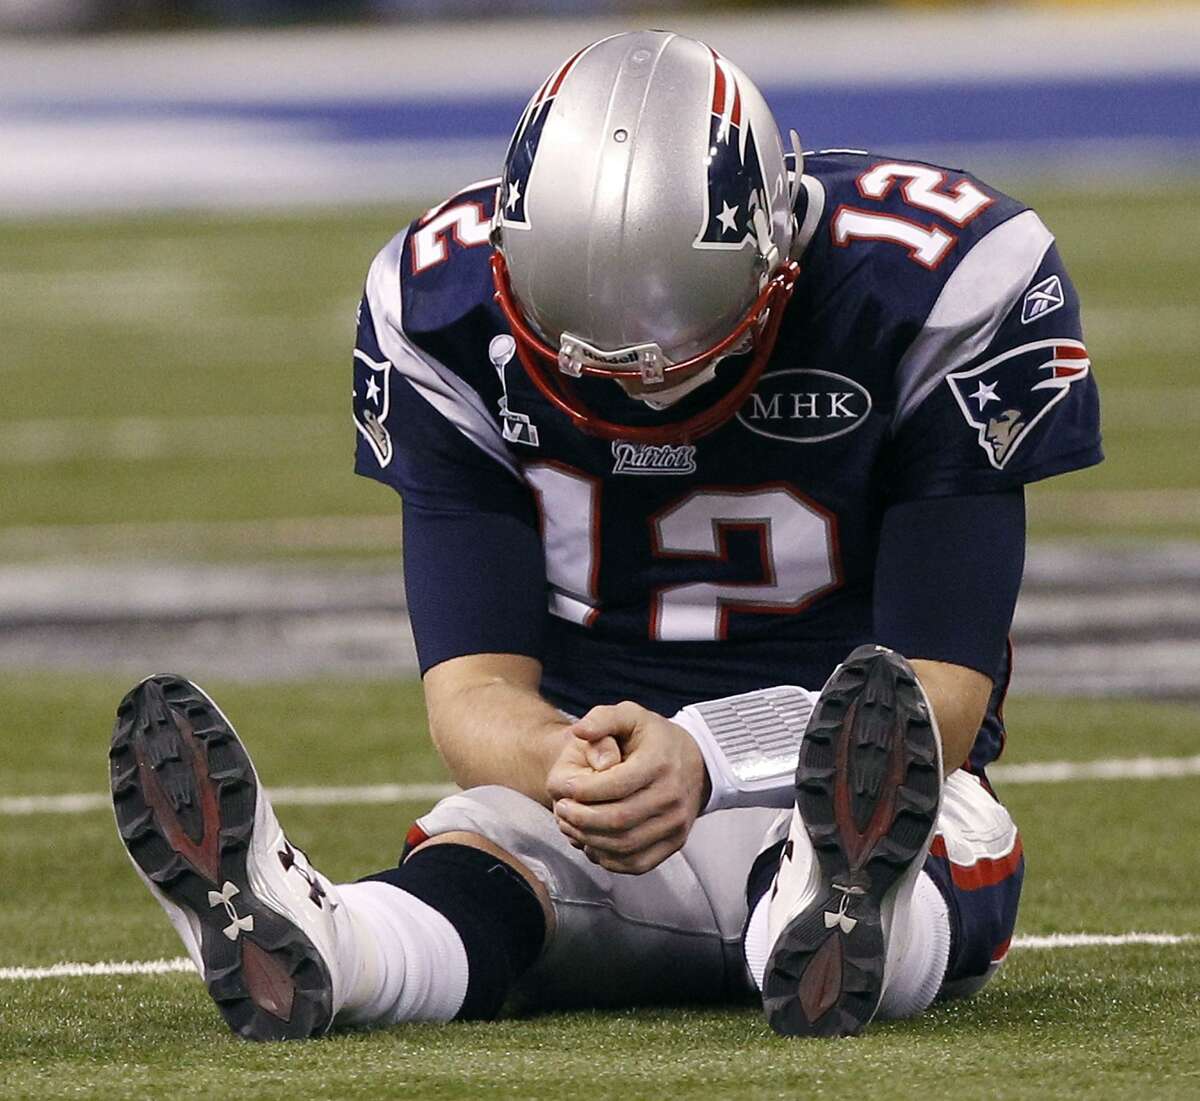 New England Patriots quarterback Tom Brady reacts after New York Giants linebacker Chase Blackburn intercepted Brady's pass intended for tight end Rob Gronkowski during the second half of the NFL Super Bowl XLVI football game, Sunday, Feb. 5, 2012, in Indianapolis. (AP Photo/Paul Sancya)